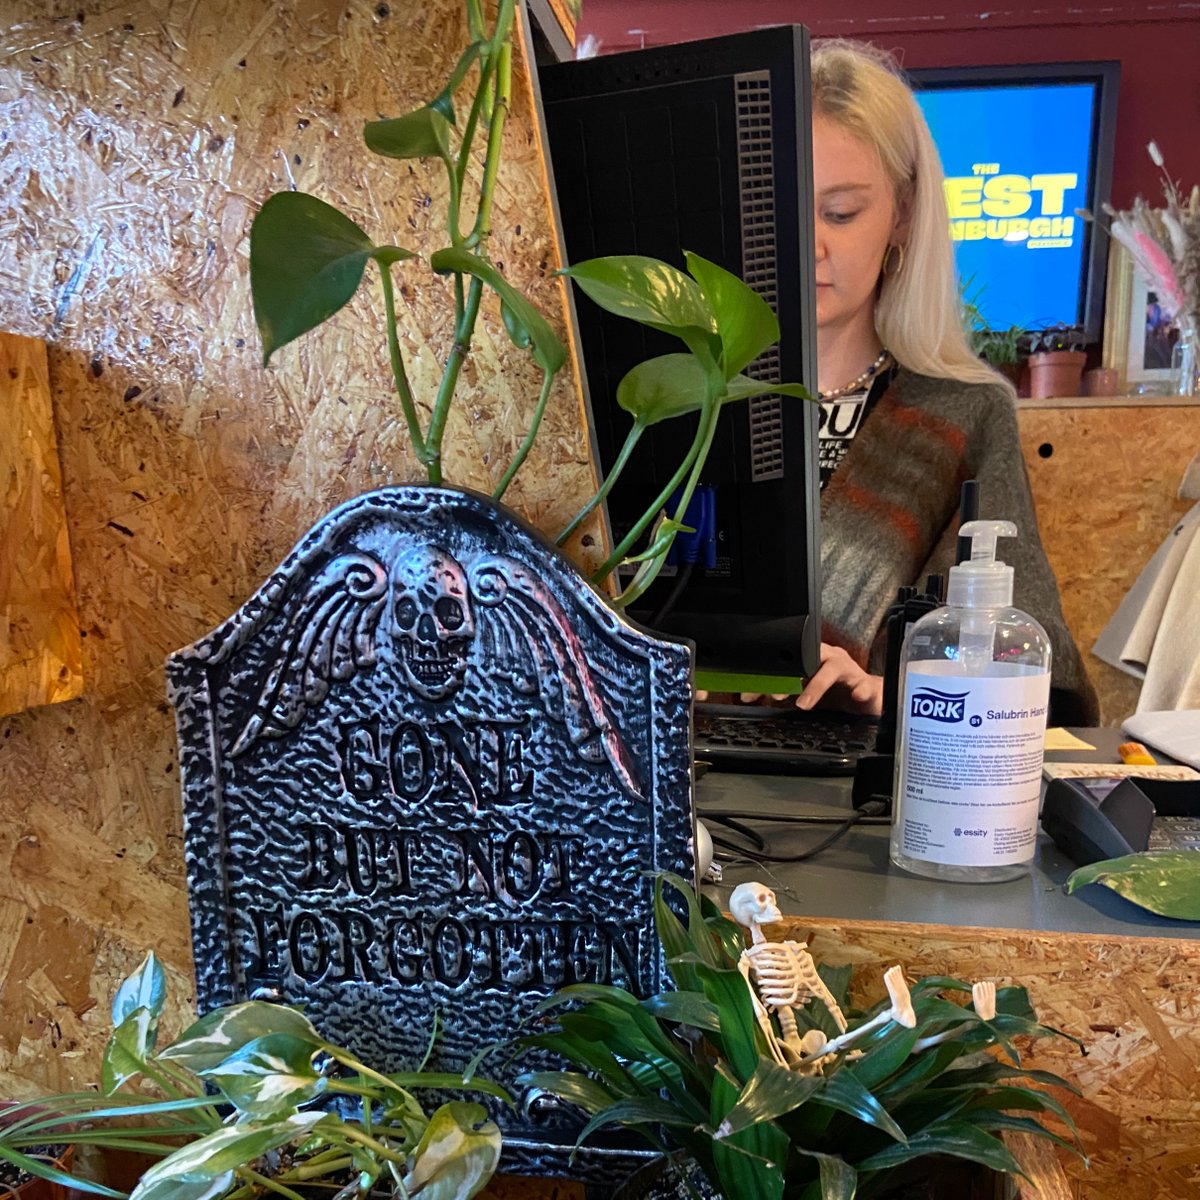 (Fairly) spooky decorations up in preparation for @siblings_comedy & @katiepritchards' Halloween specials next week… the real question is, are they spooky enough to match our comedians?